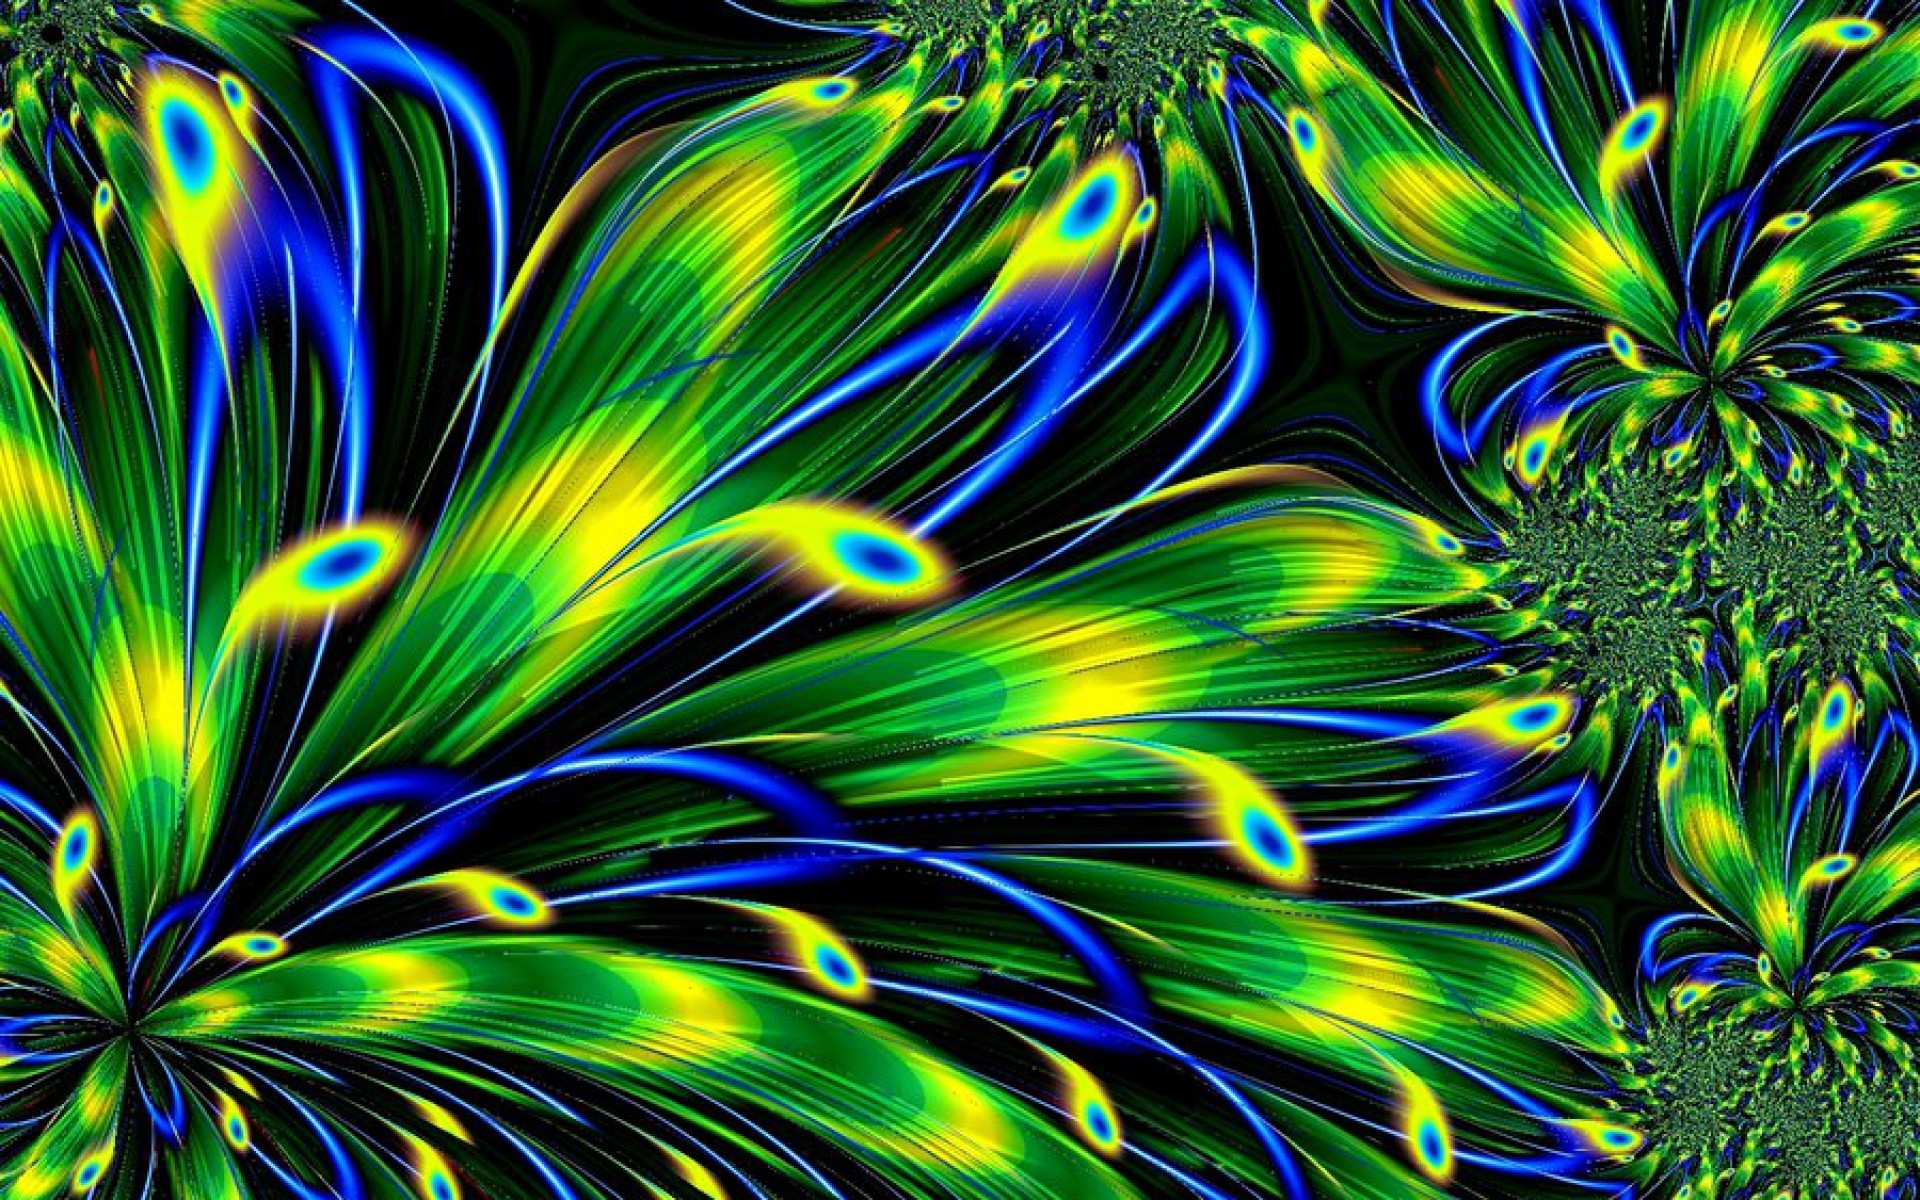 1920x1200 GKO.166 Peacock Feather 2089.22 Kb - HD Wallpapers